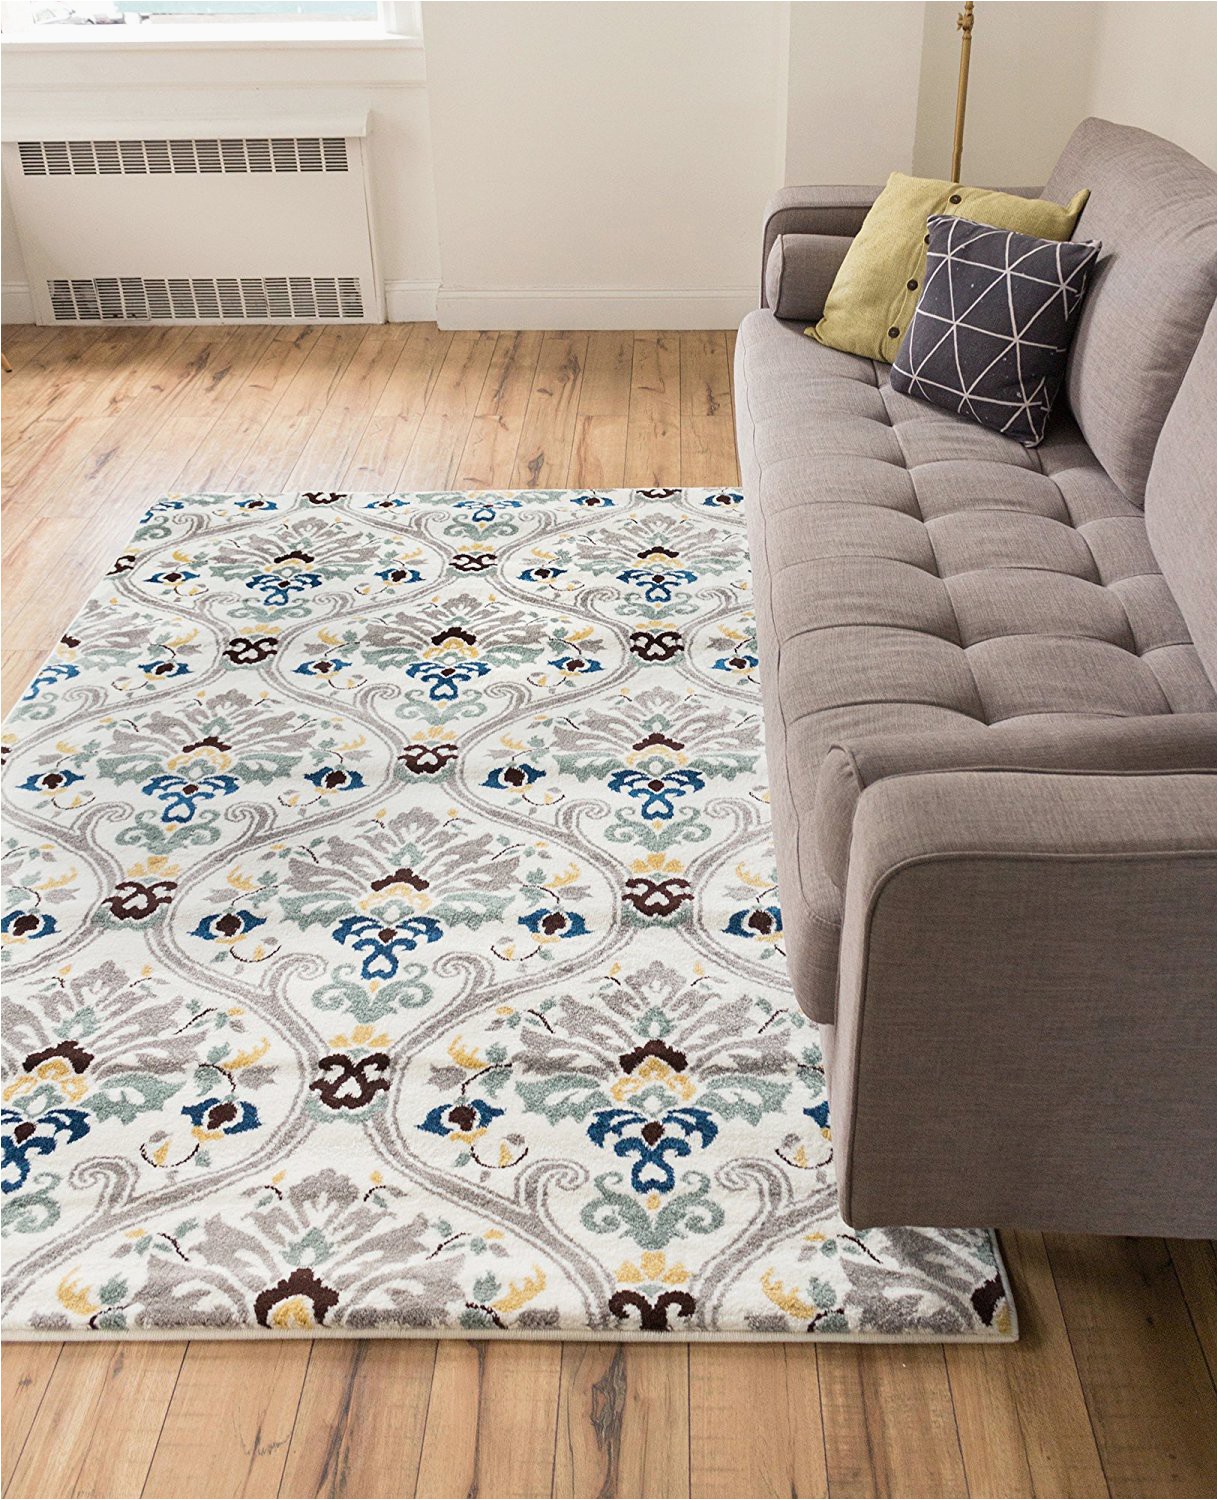 Living Spaces area Rugs 5×7 Ogee Waves Lattice Grey Gold Blue Ivory Floral area Rug 5×7 5 3" X 7 3" Modern oriental Geometric soft Pile Contemporary Carpet Thick Plush Stain